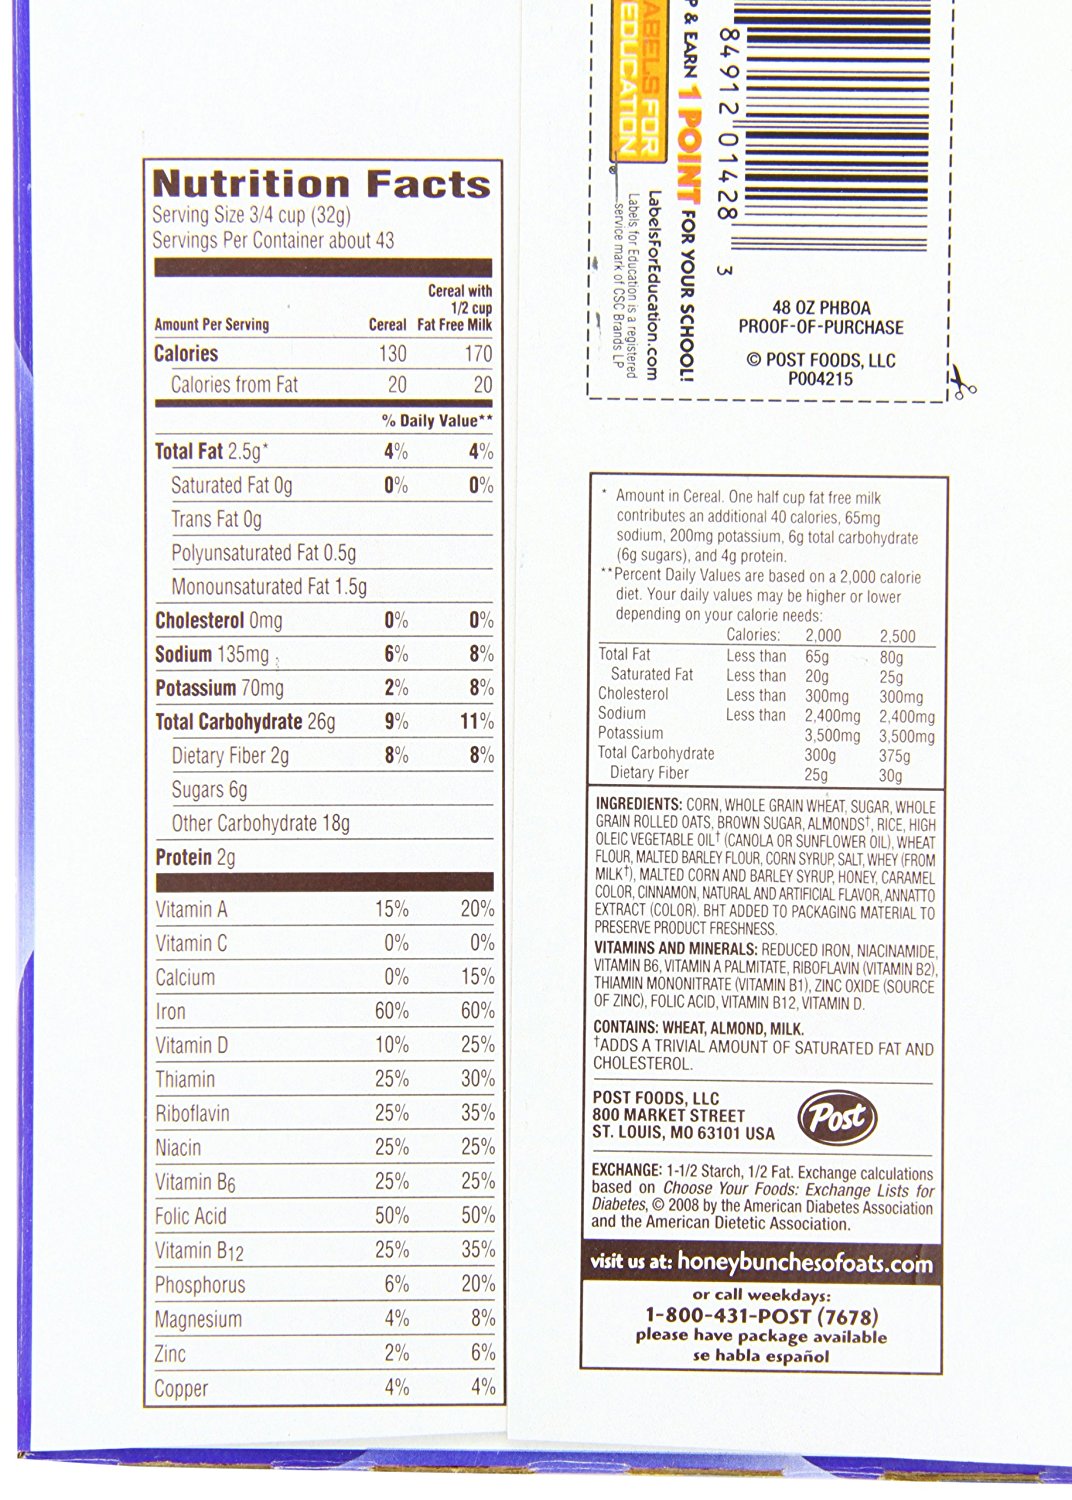 Post Honey Bunches of Oats Cereal, Crunchy with Almonds, 24 oz, 2 Ct - image 3 of 3